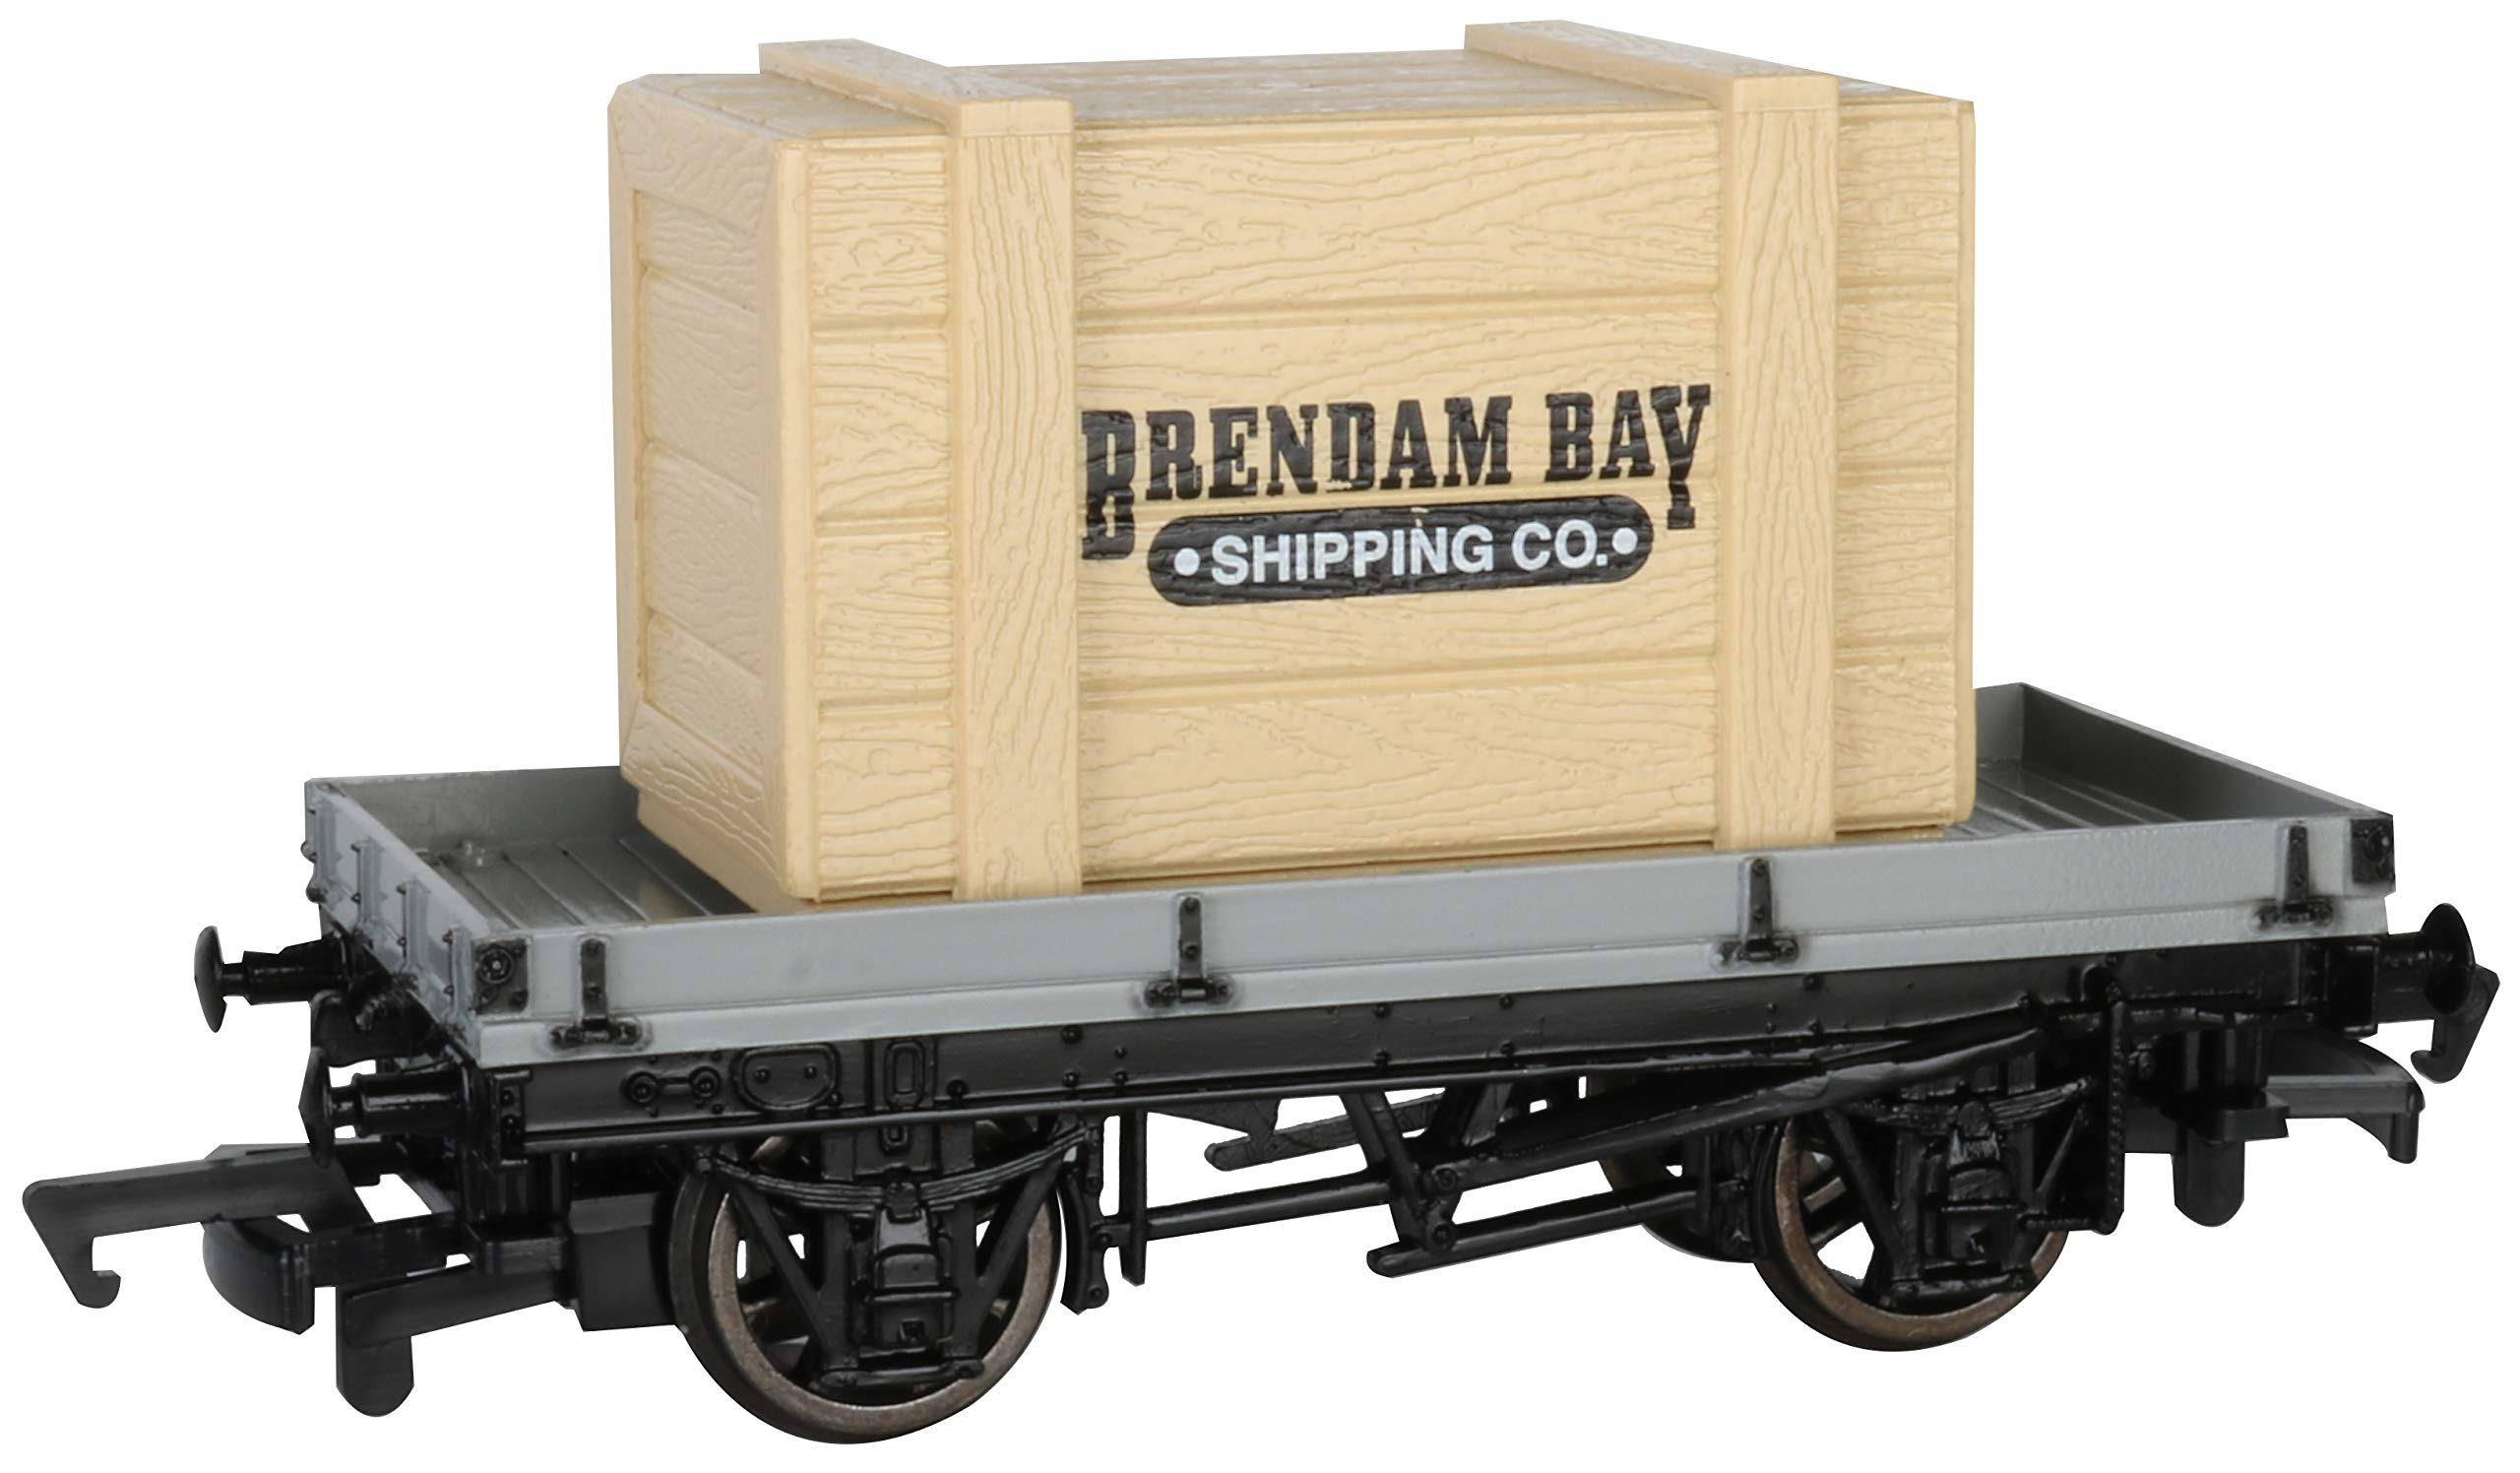 Bachmann Trains - Thomas & Friends 1 Plank Wagon with Brendam Bay Shipping Co. Crate - HO Scale